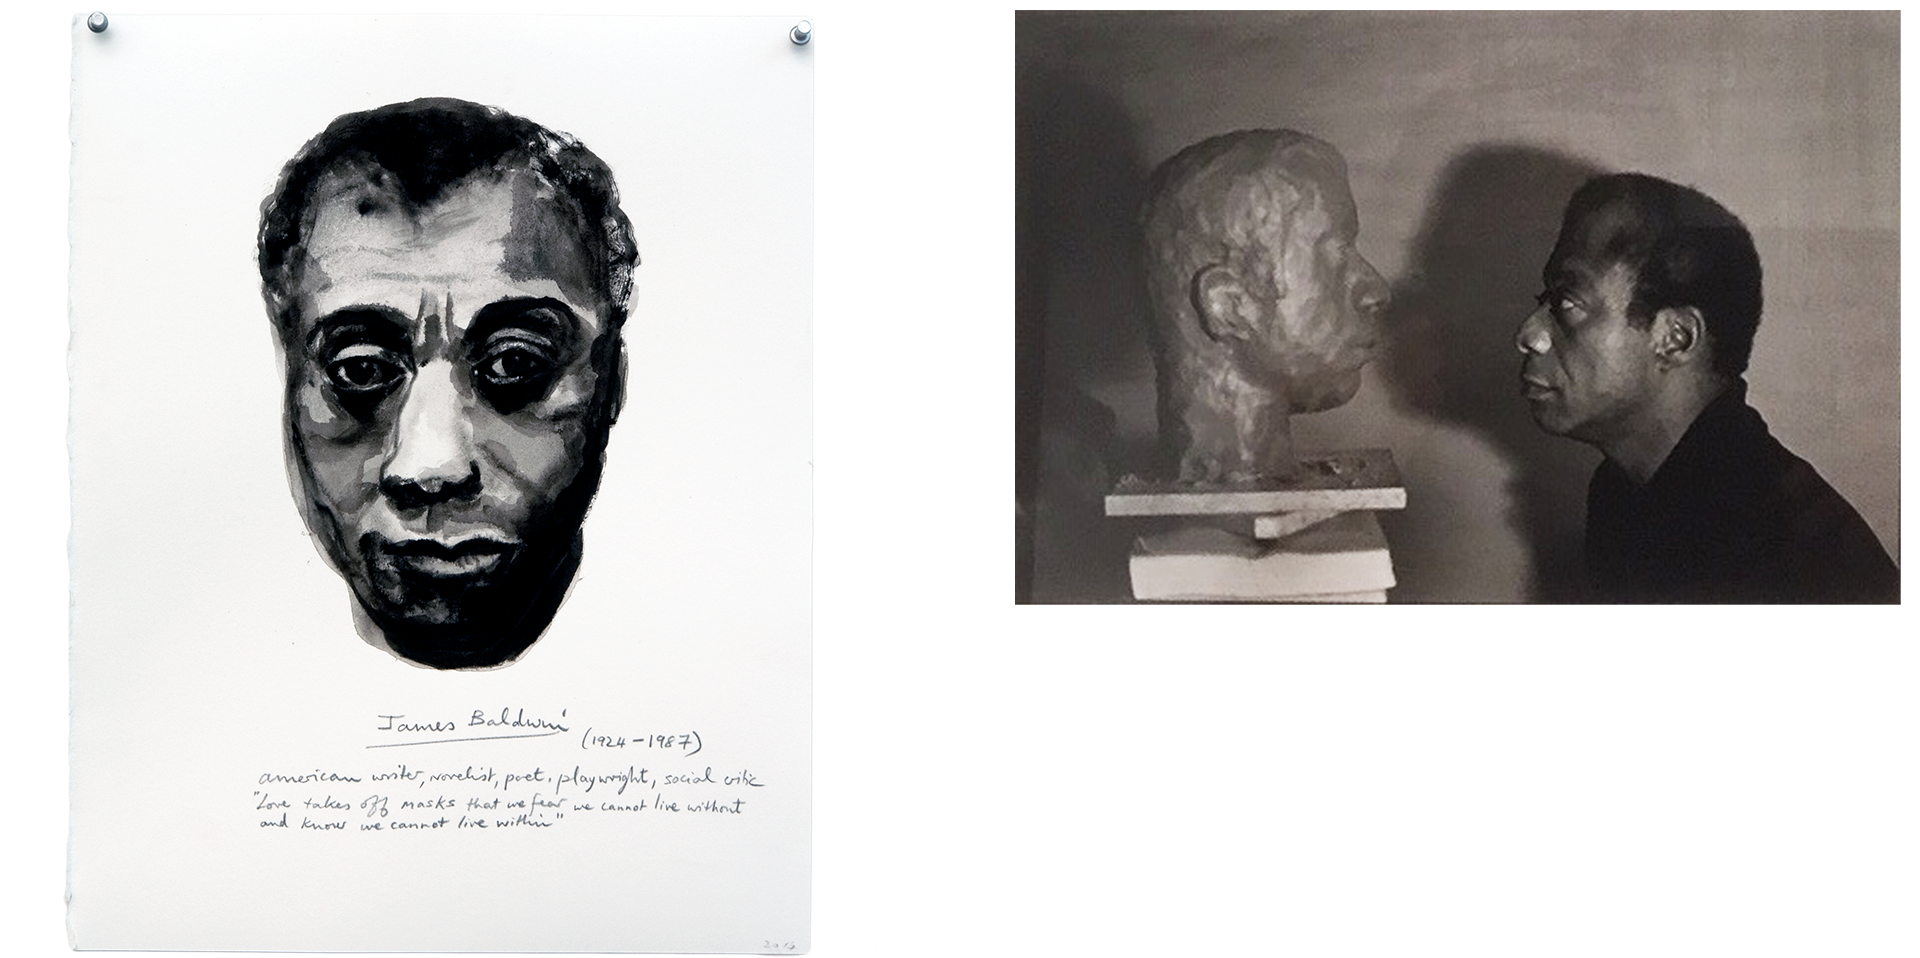 Left: Ink and pencil drawing of James Baldwin’s face.  Right: Black and white photograph of James Baldwin posing with a bust of himself sculpted out of clay.